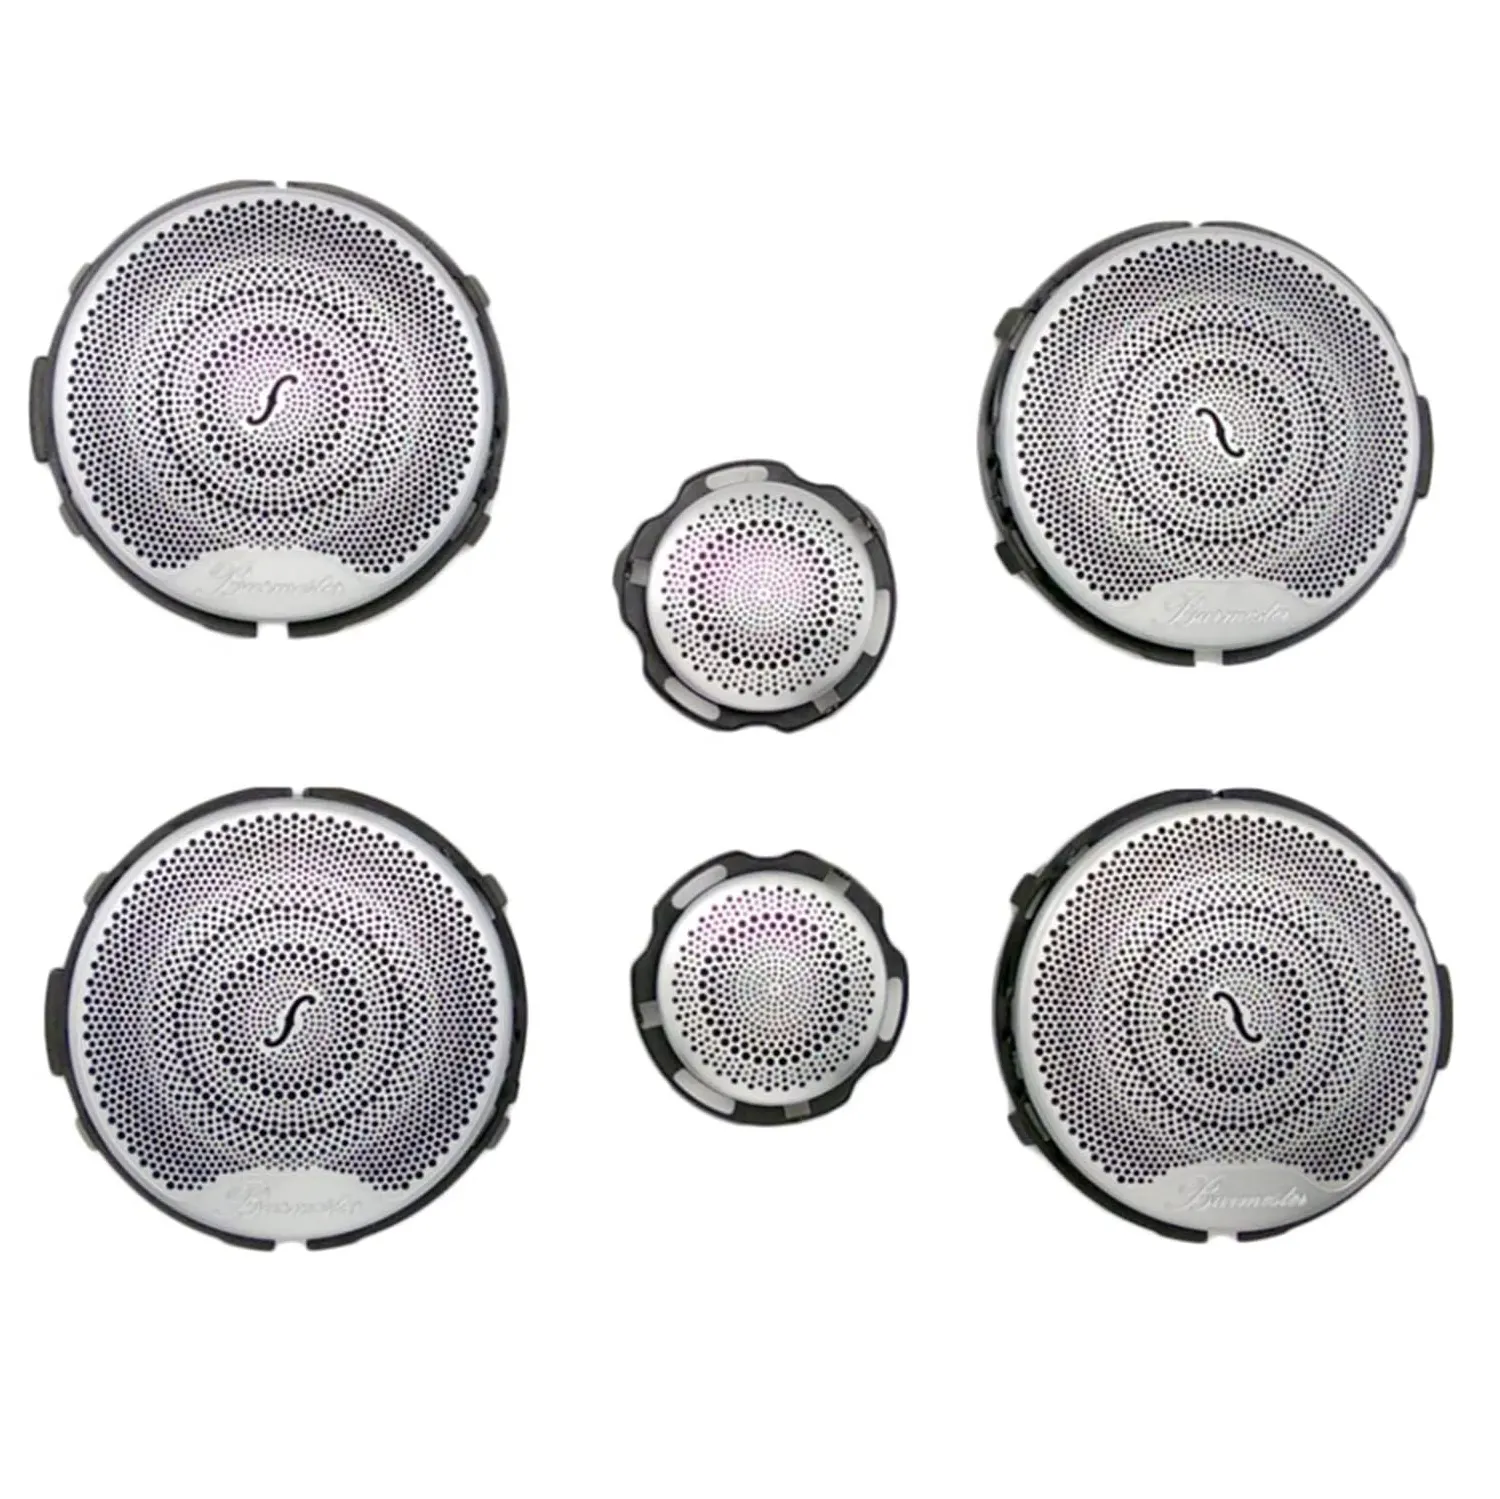 Front Air Outlet VentHigh Quality Stainless Steel Door Speaker Cover Set Without Light 6 Pieces For Mercedes Benz E-class W213